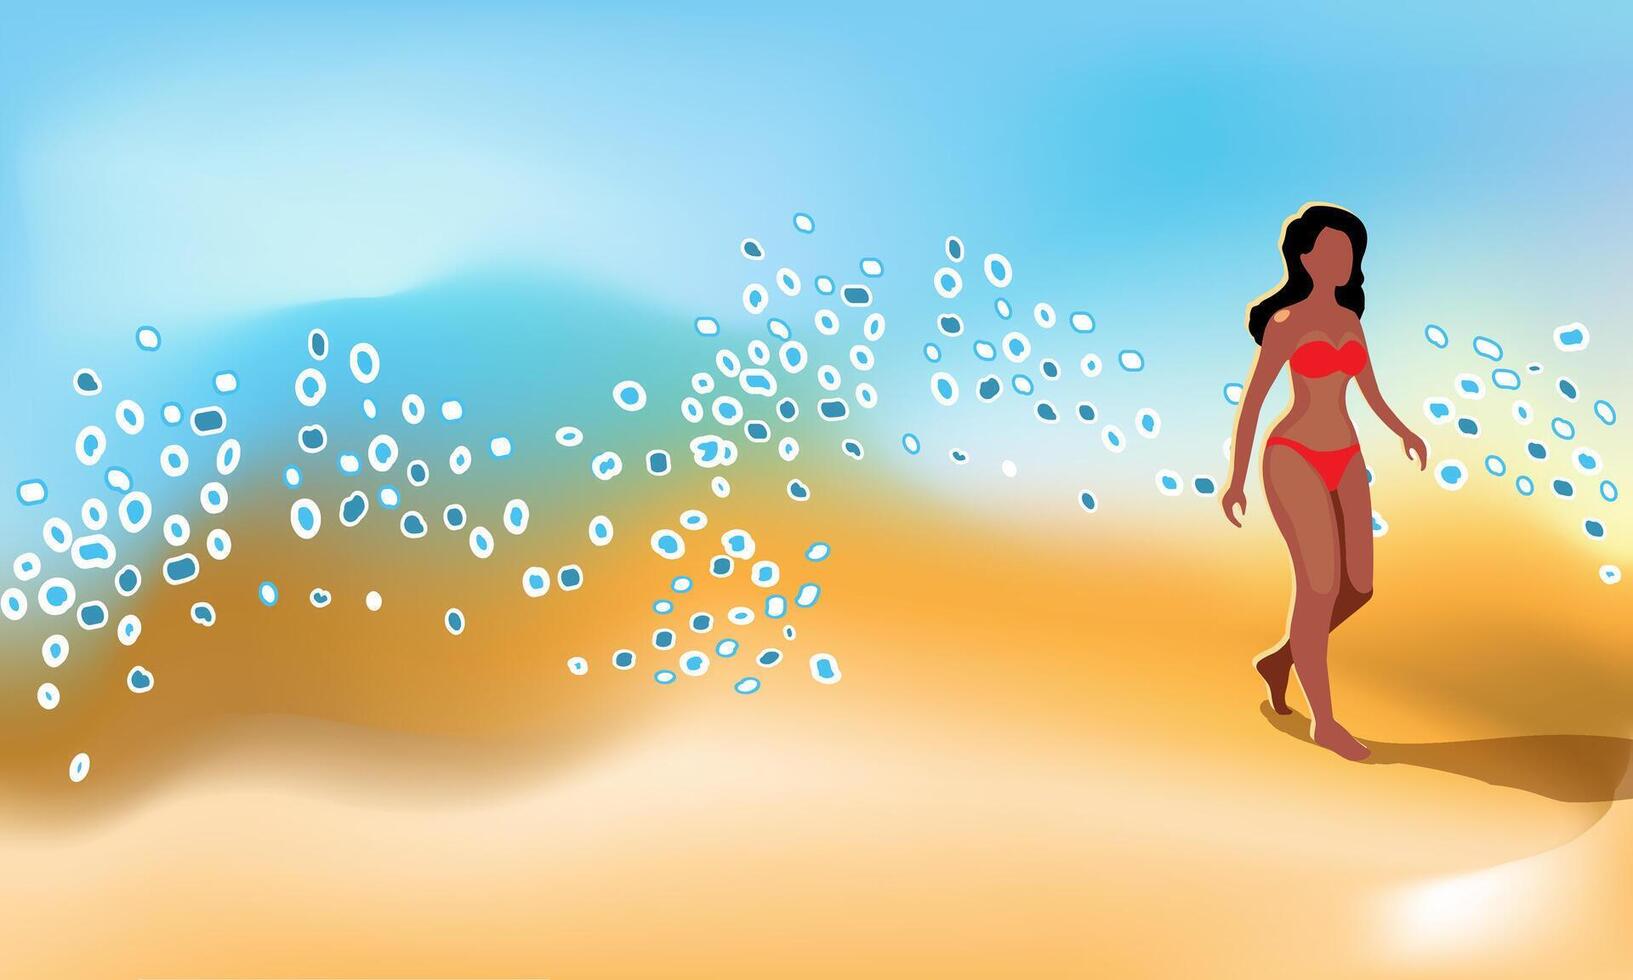 Girl by the seashore. Ocean waves with splashes. Tourism and recreation during the summer holidays. vector